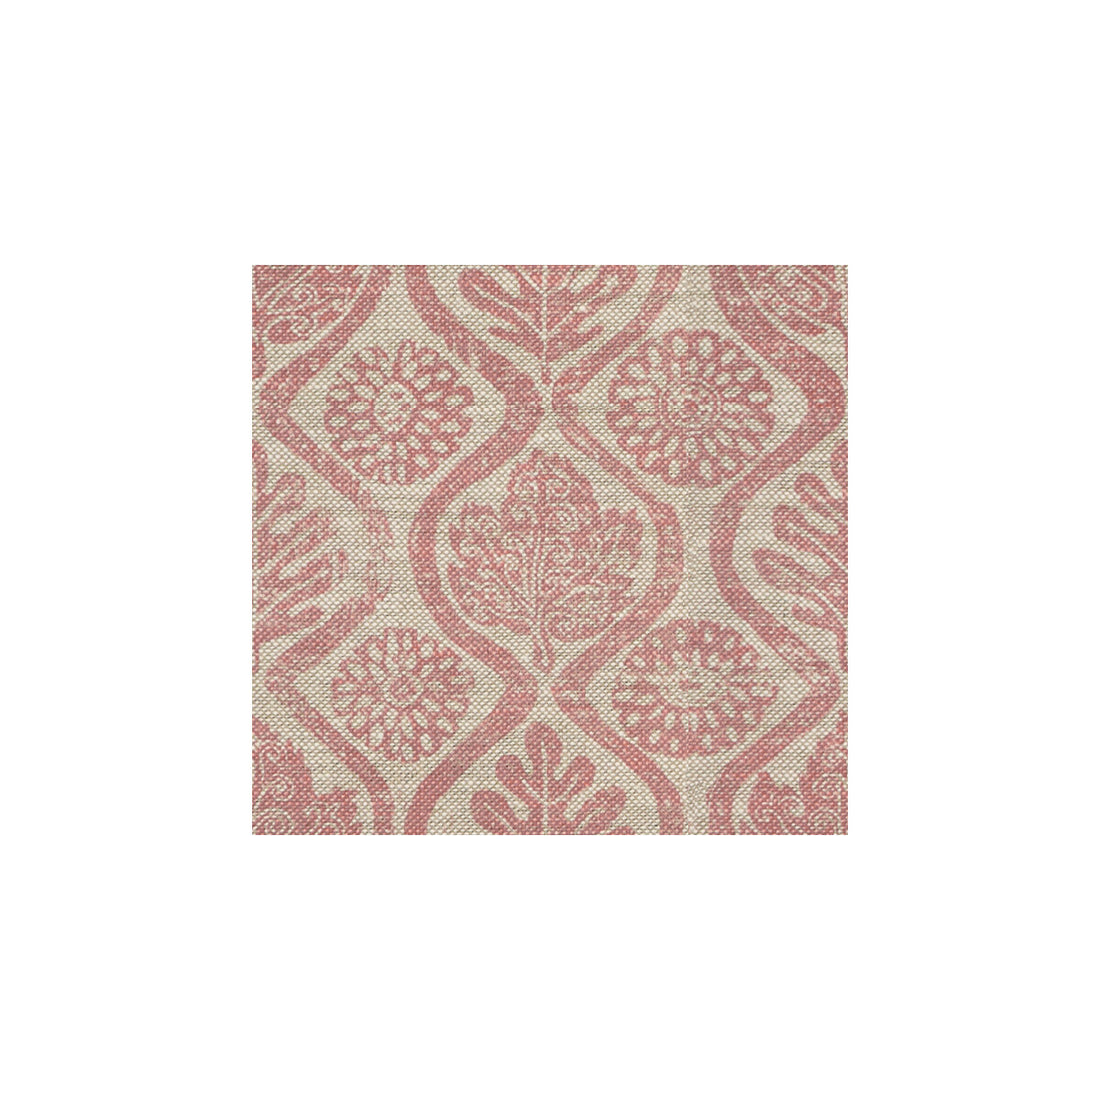 Oakleaves fabric in pink/oatmeal color - pattern BFC-3515.79.0 - by Lee Jofa in the Blithfield collection